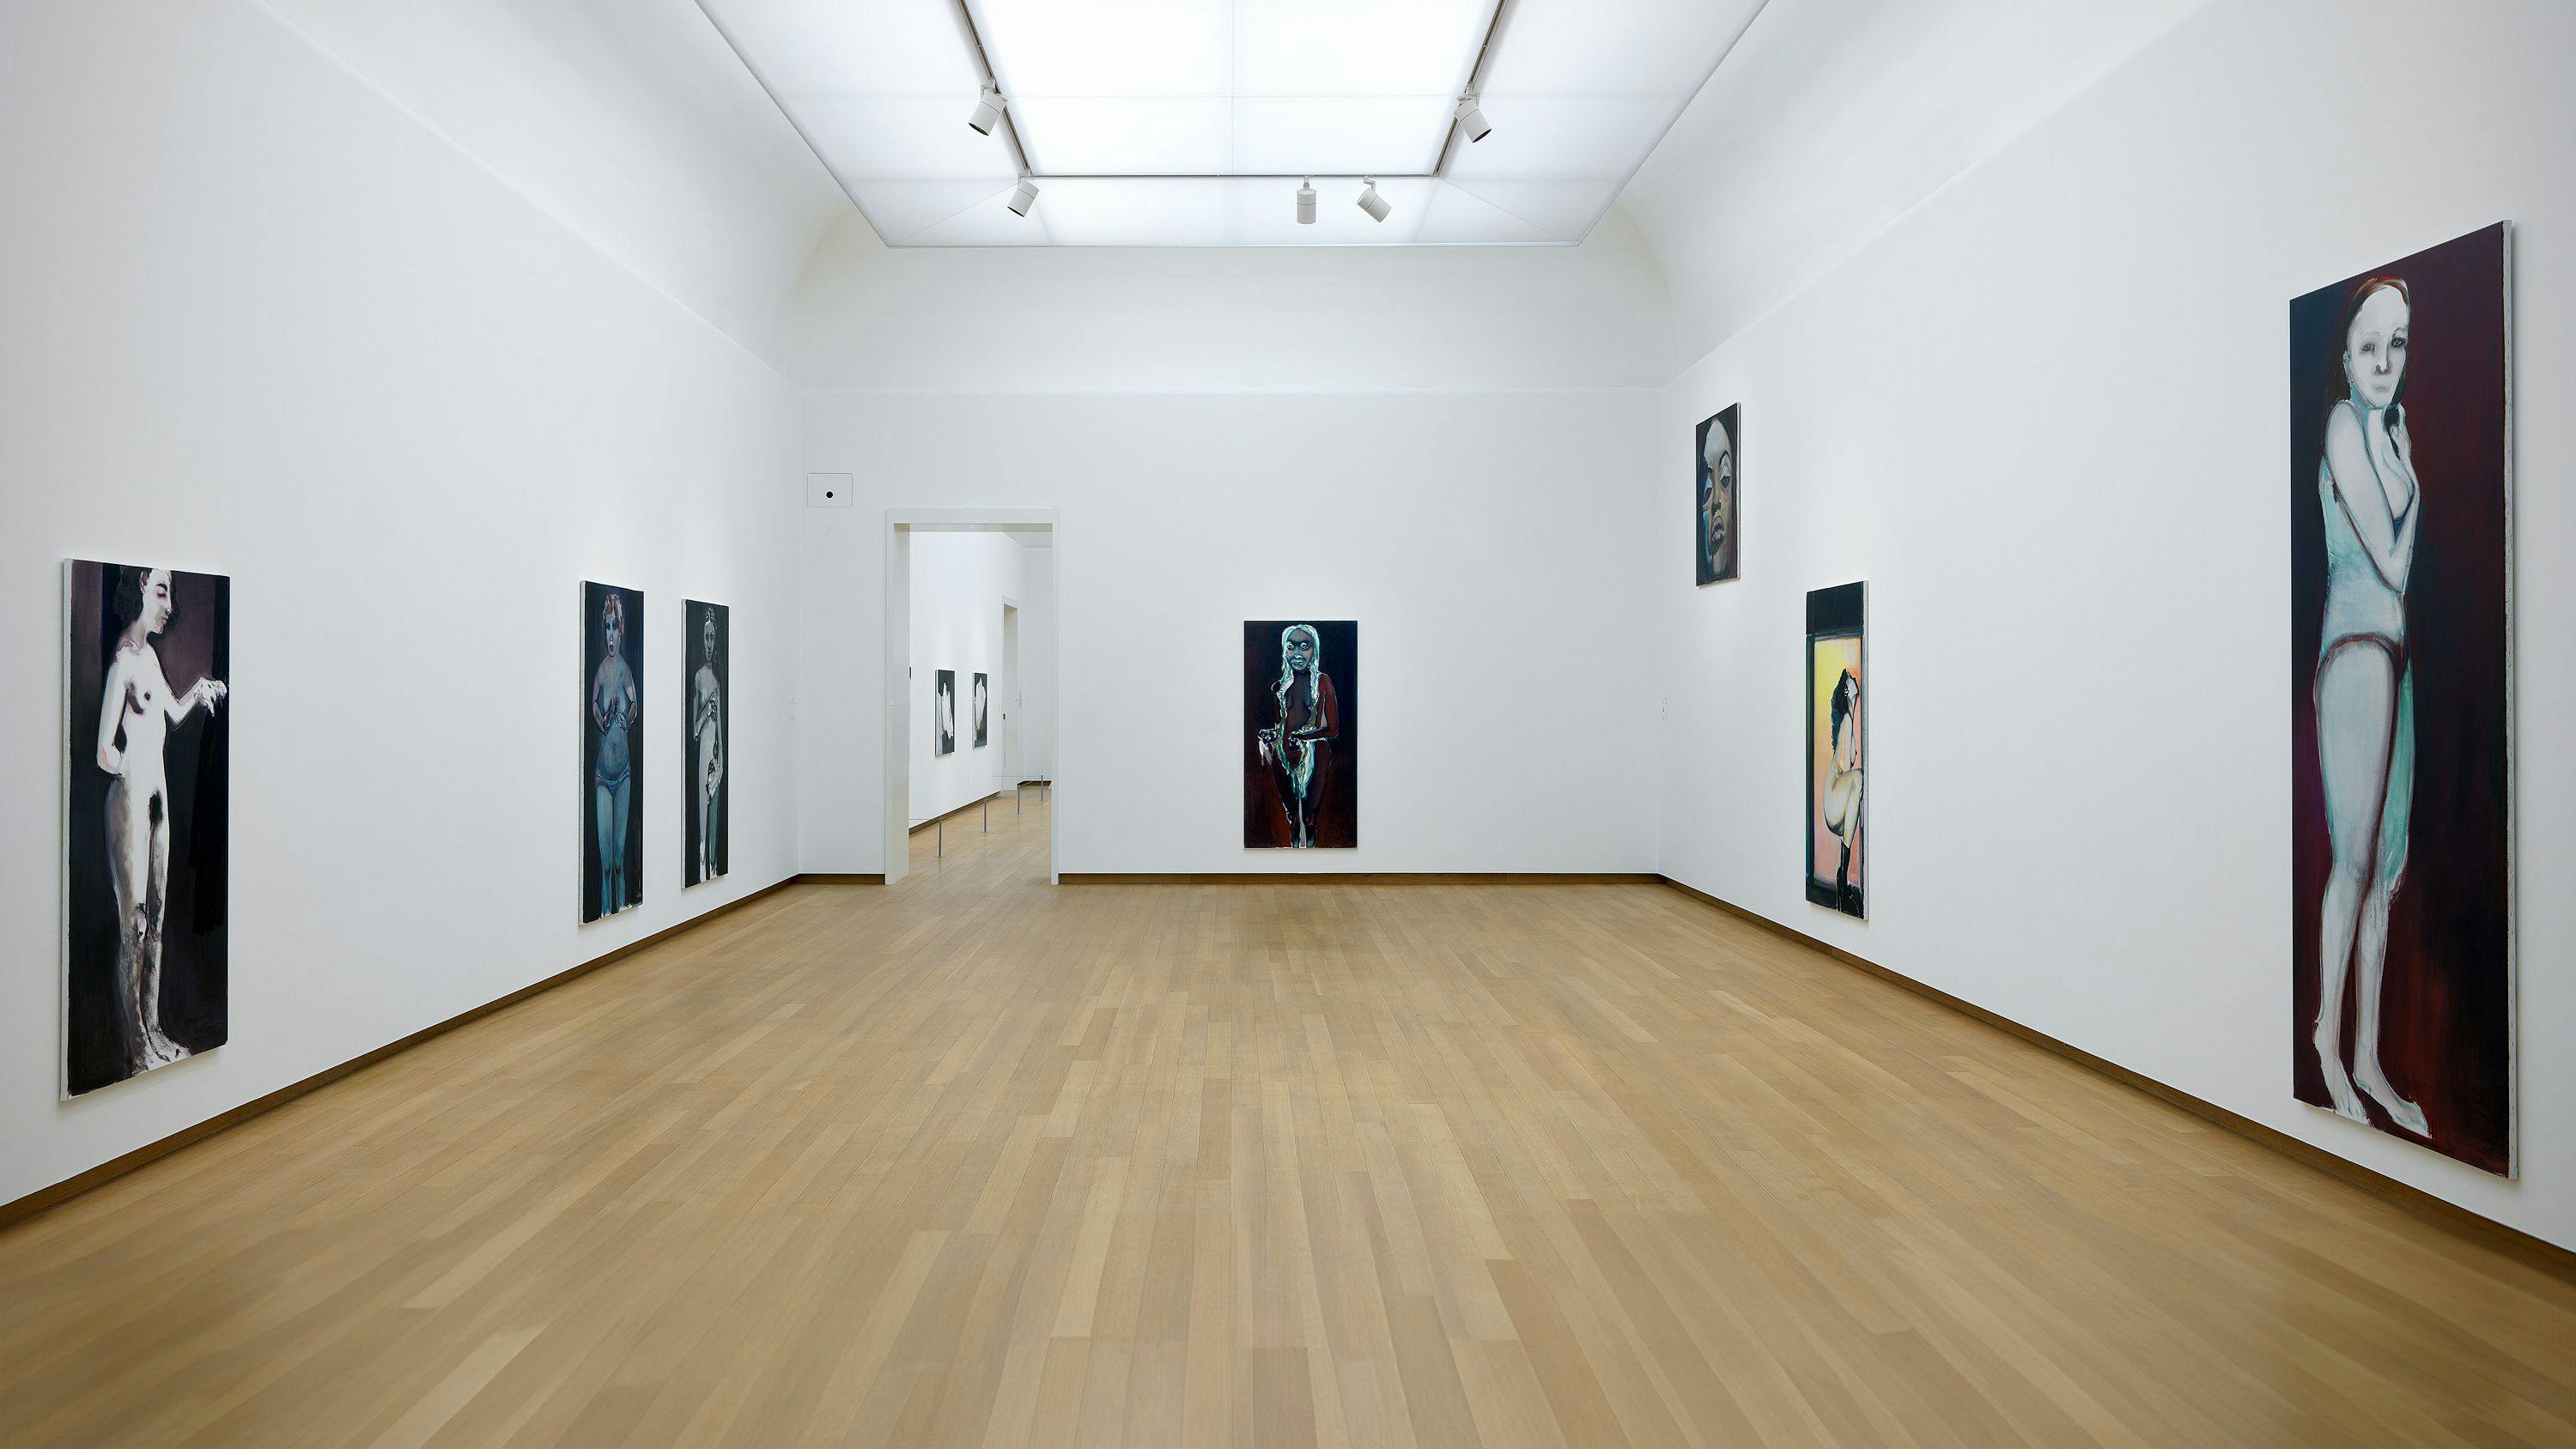 Installation view of the exhibition, MARLENE DUMAS: THE IMAGE AS BURDEN, at Stedelijk Museum Amsterdam in 2014 to 2015.